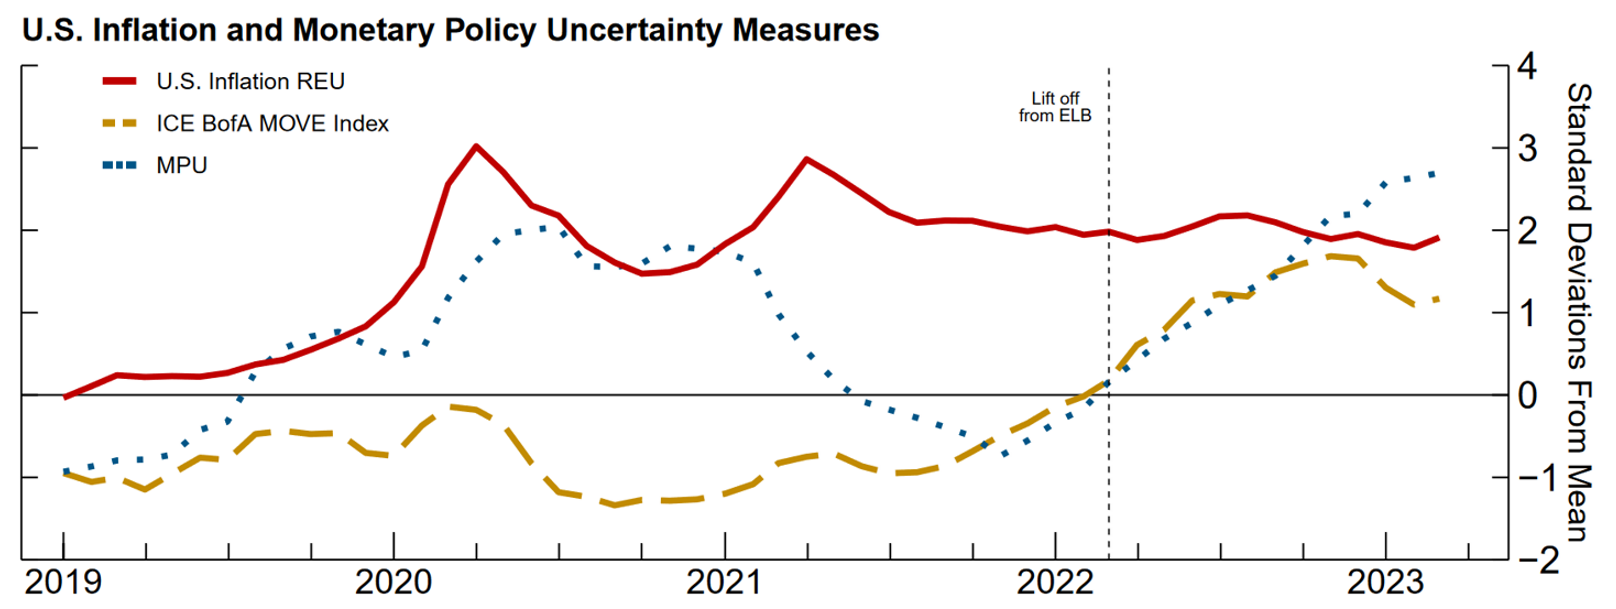 Figure 7. U.S. Inflation and Monetary Policy Uncertainty Measures. See accessible link for data.